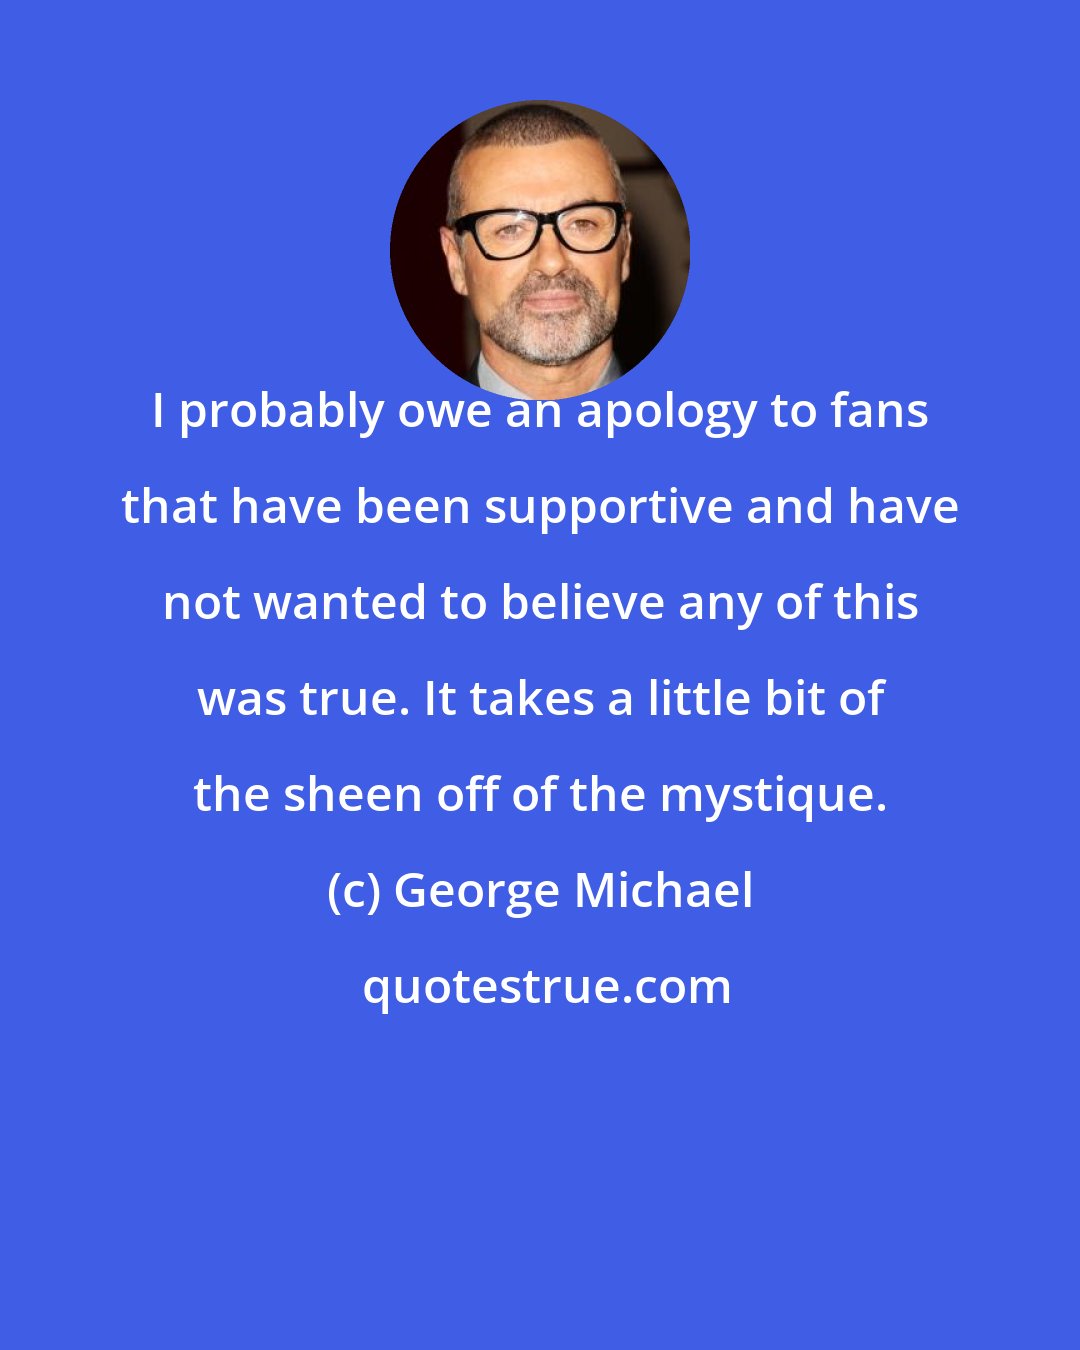 George Michael: I probably owe an apology to fans that have been supportive and have not wanted to believe any of this was true. It takes a little bit of the sheen off of the mystique.